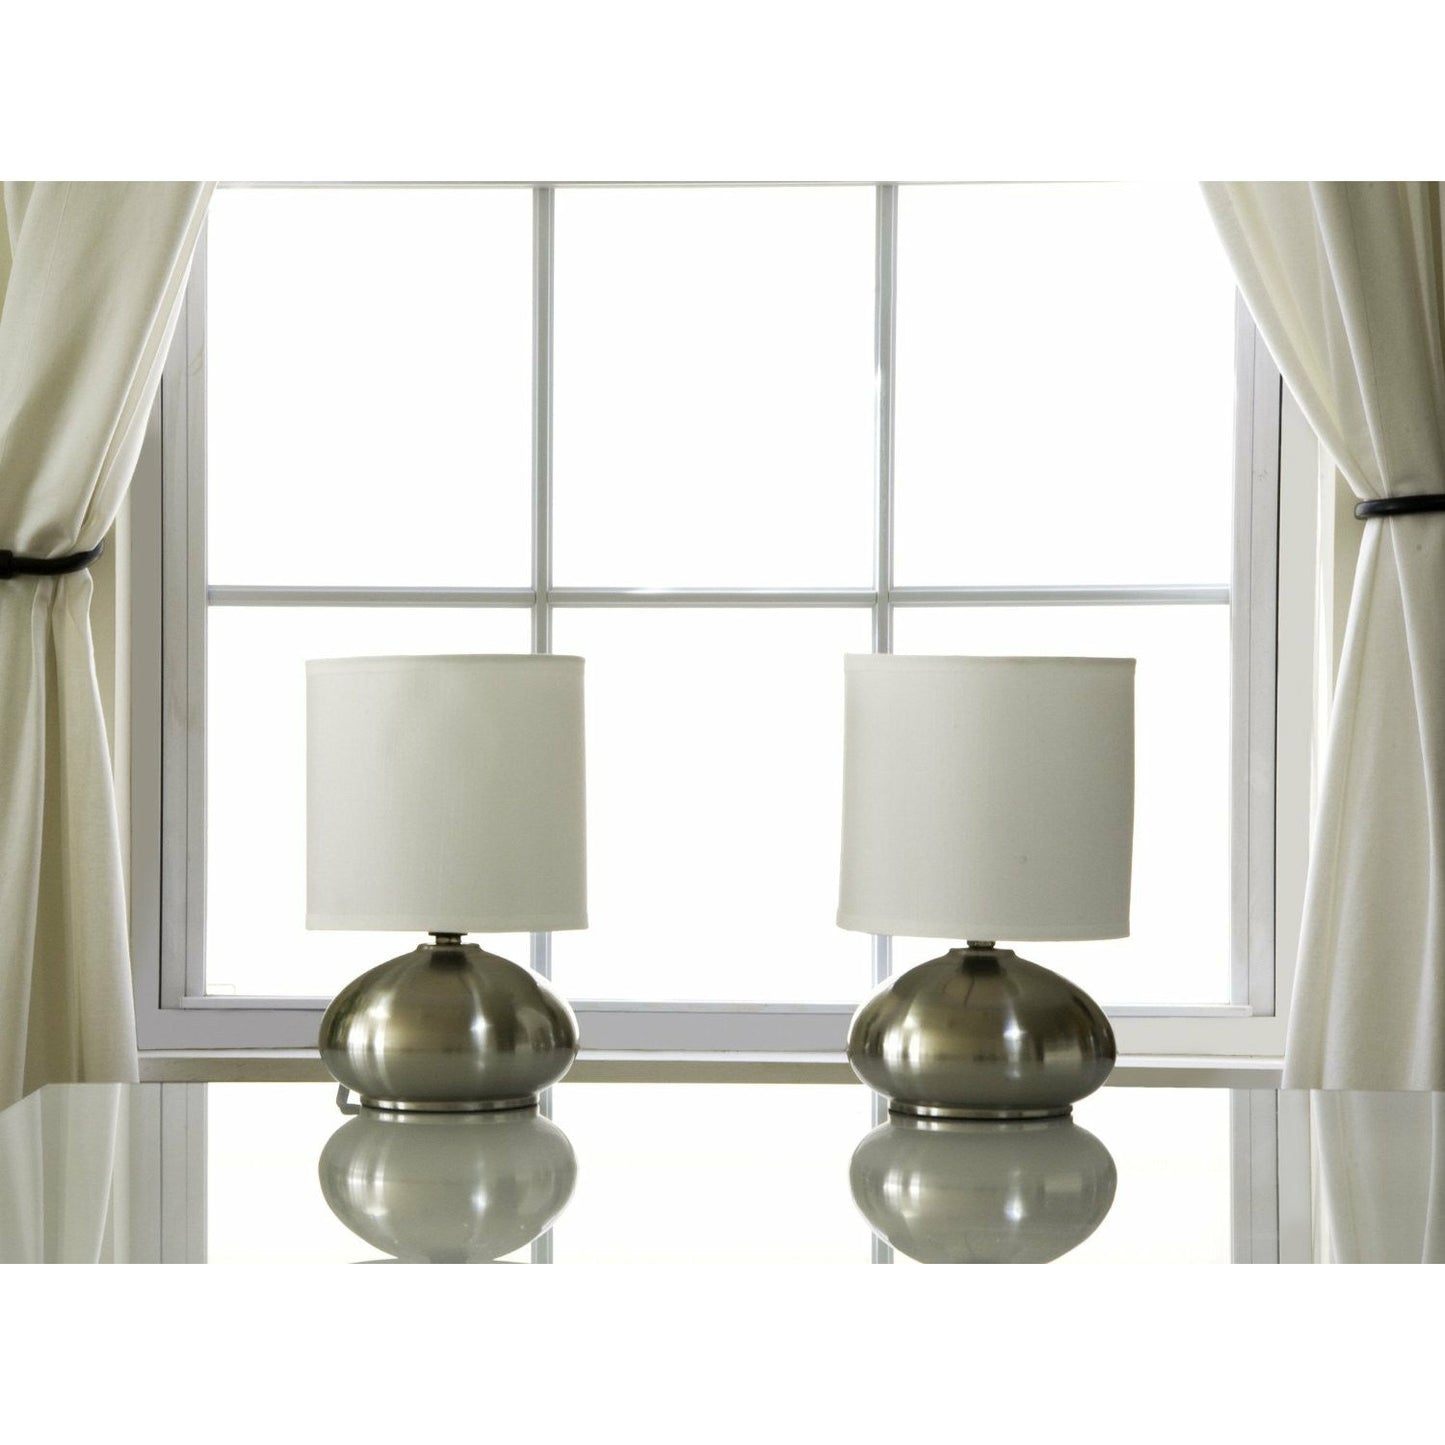 Light Accents Bedroom Side Table Lamps with 3-way Switch Brushed Nickel (Set of 2) - LightAccents.com
 - 3